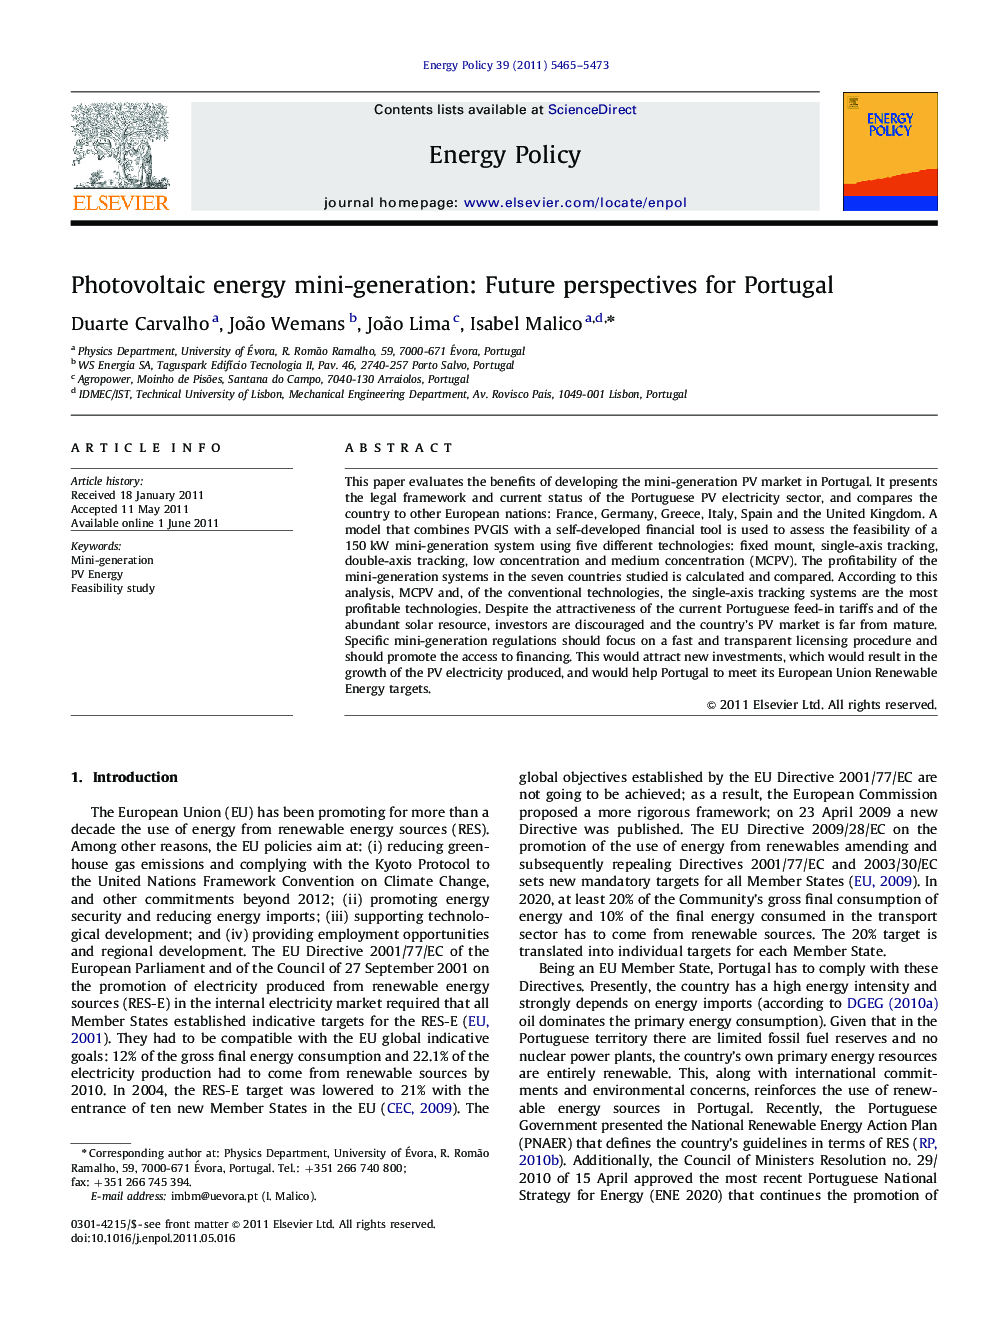 Photovoltaic energy mini-generation: Future perspectives for Portugal